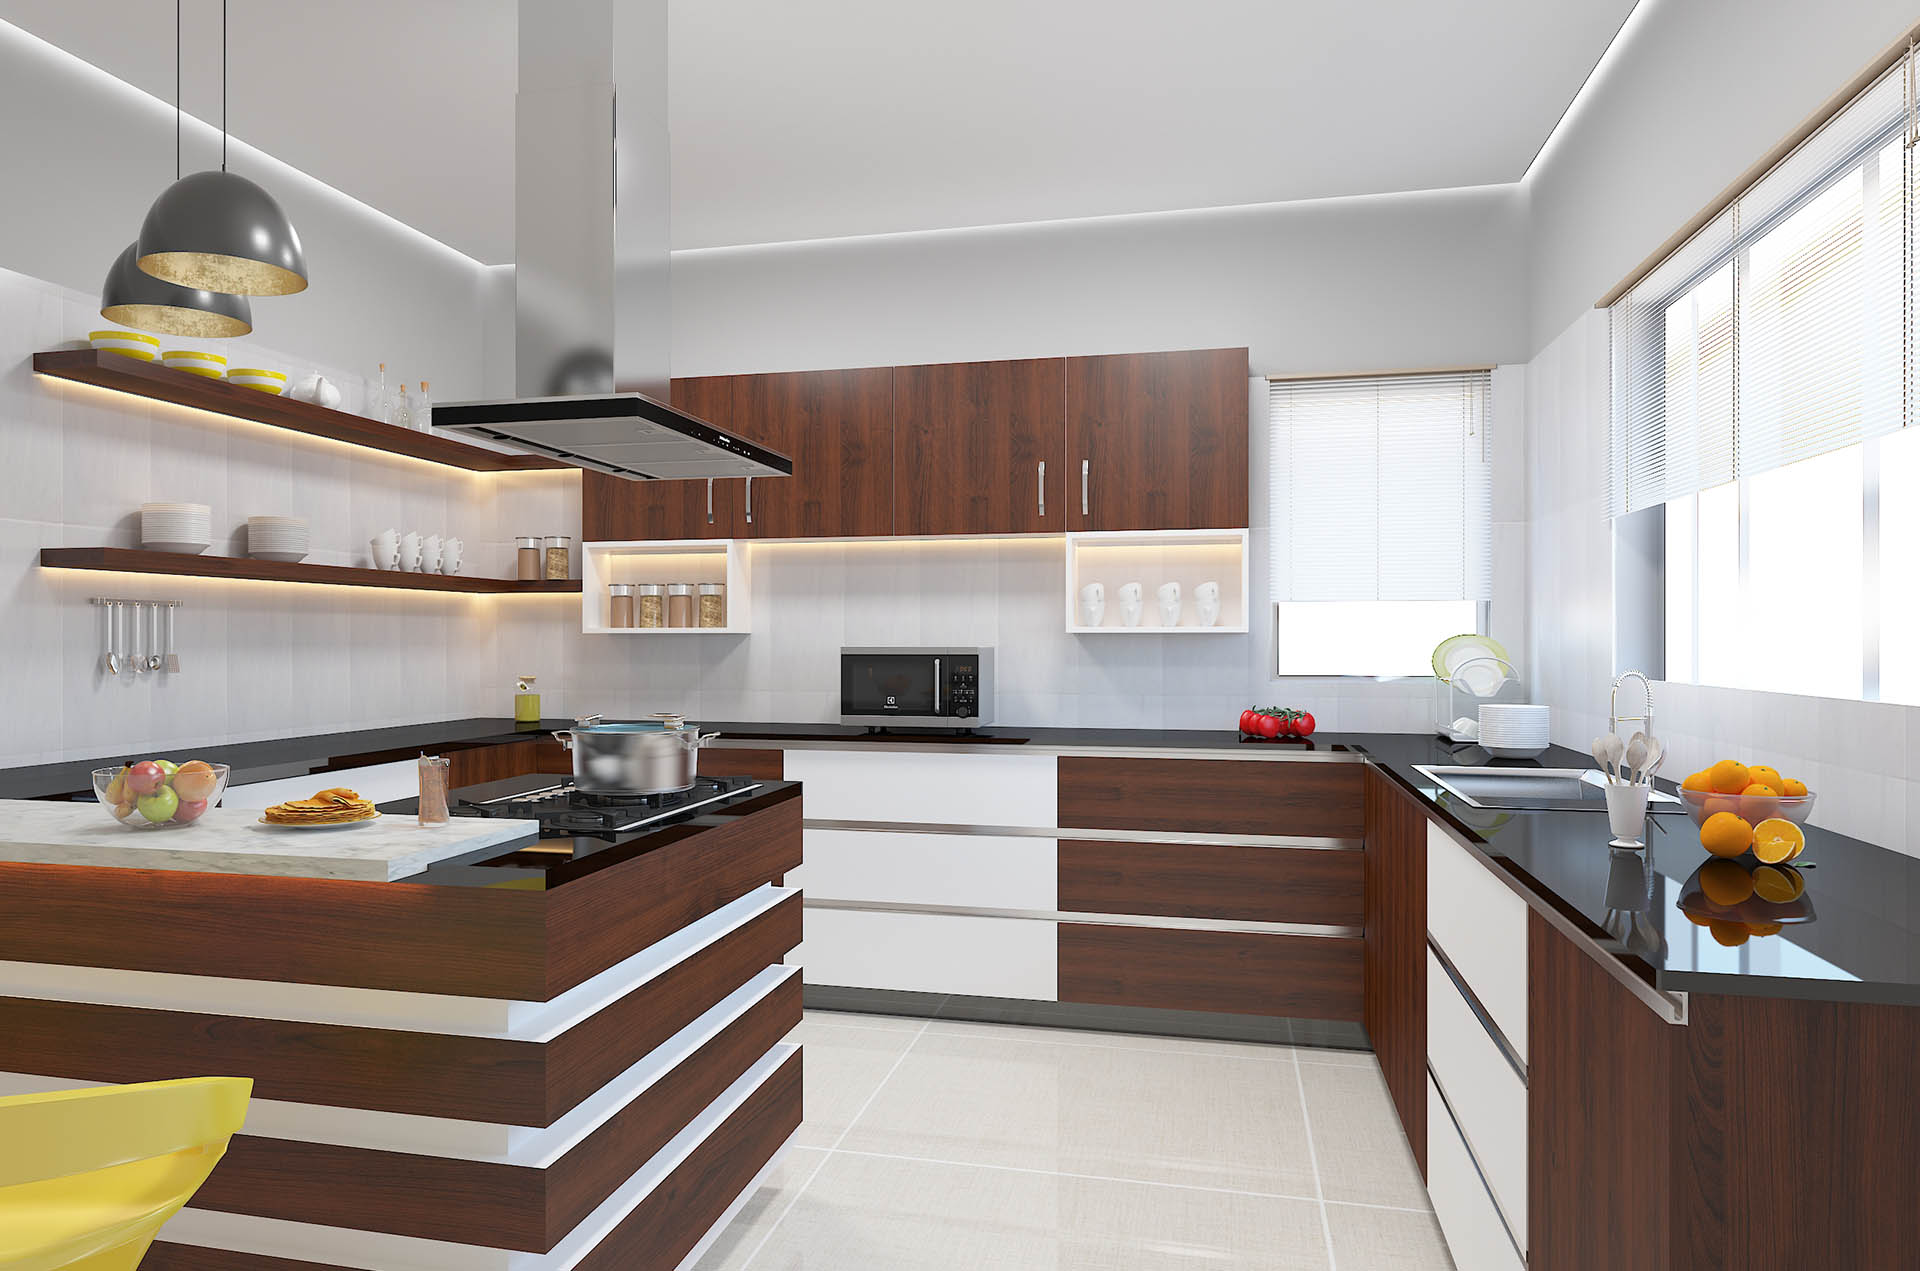 Stainless steel modular kitchen with wooden finish